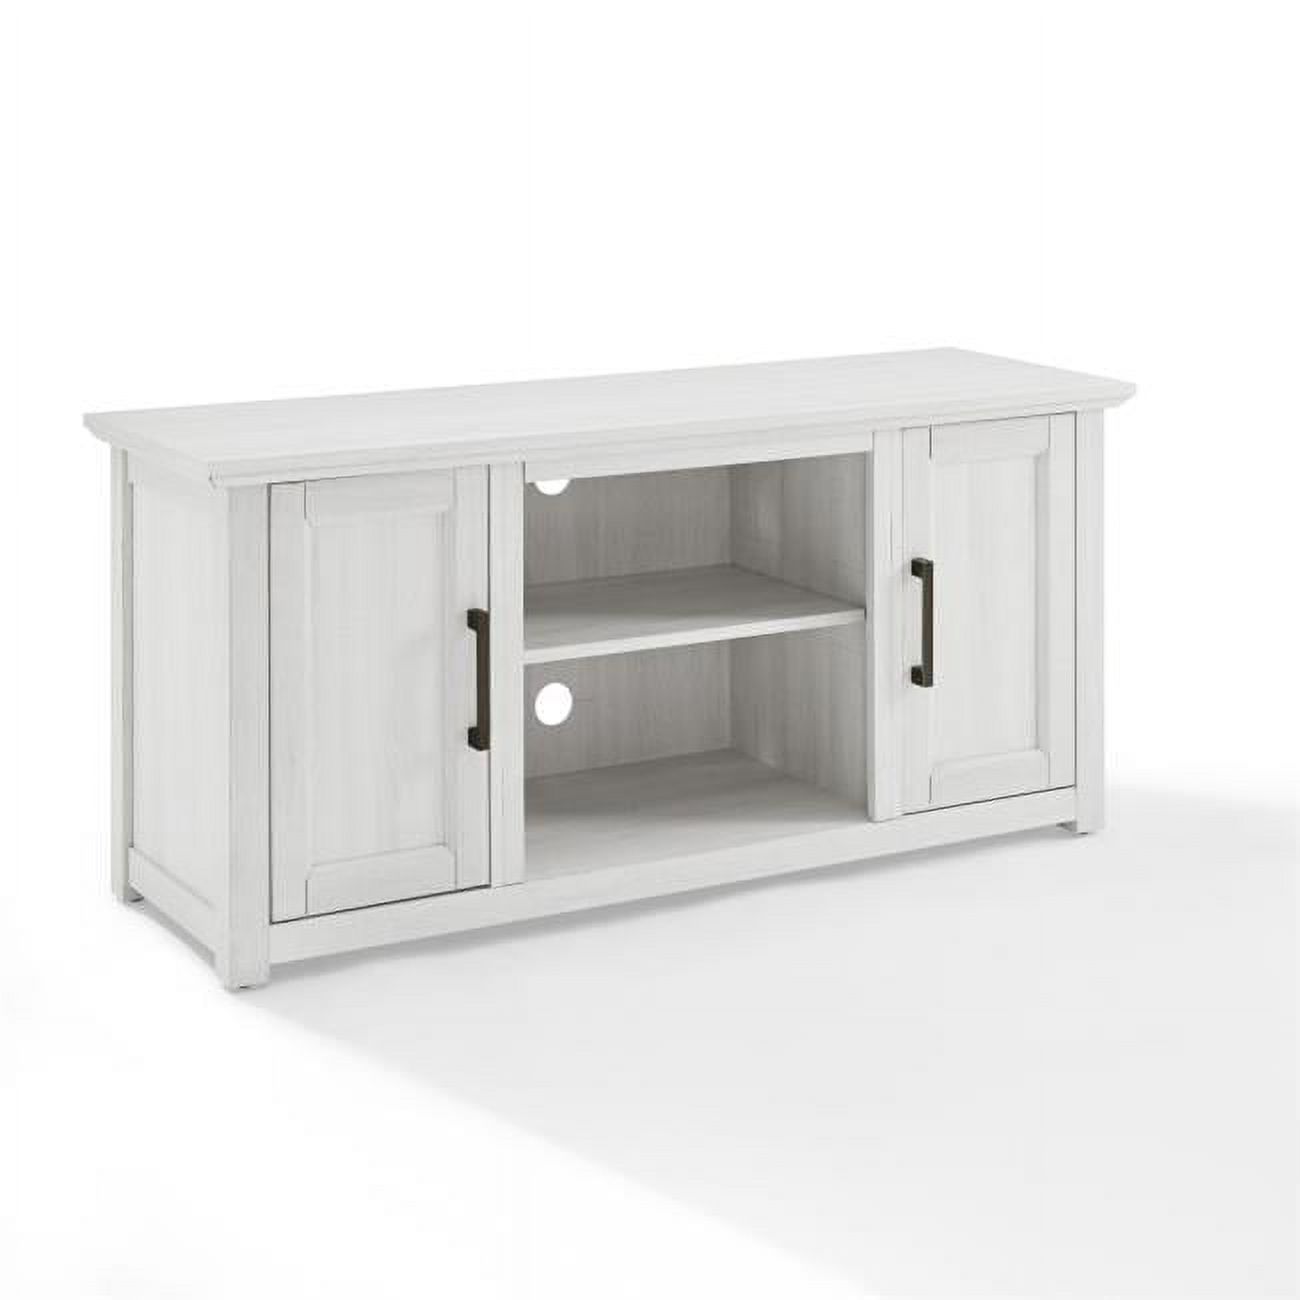 Crosley Camden 48" Rustic Low Profile TV Stand in Whitewash - image 1 of 15